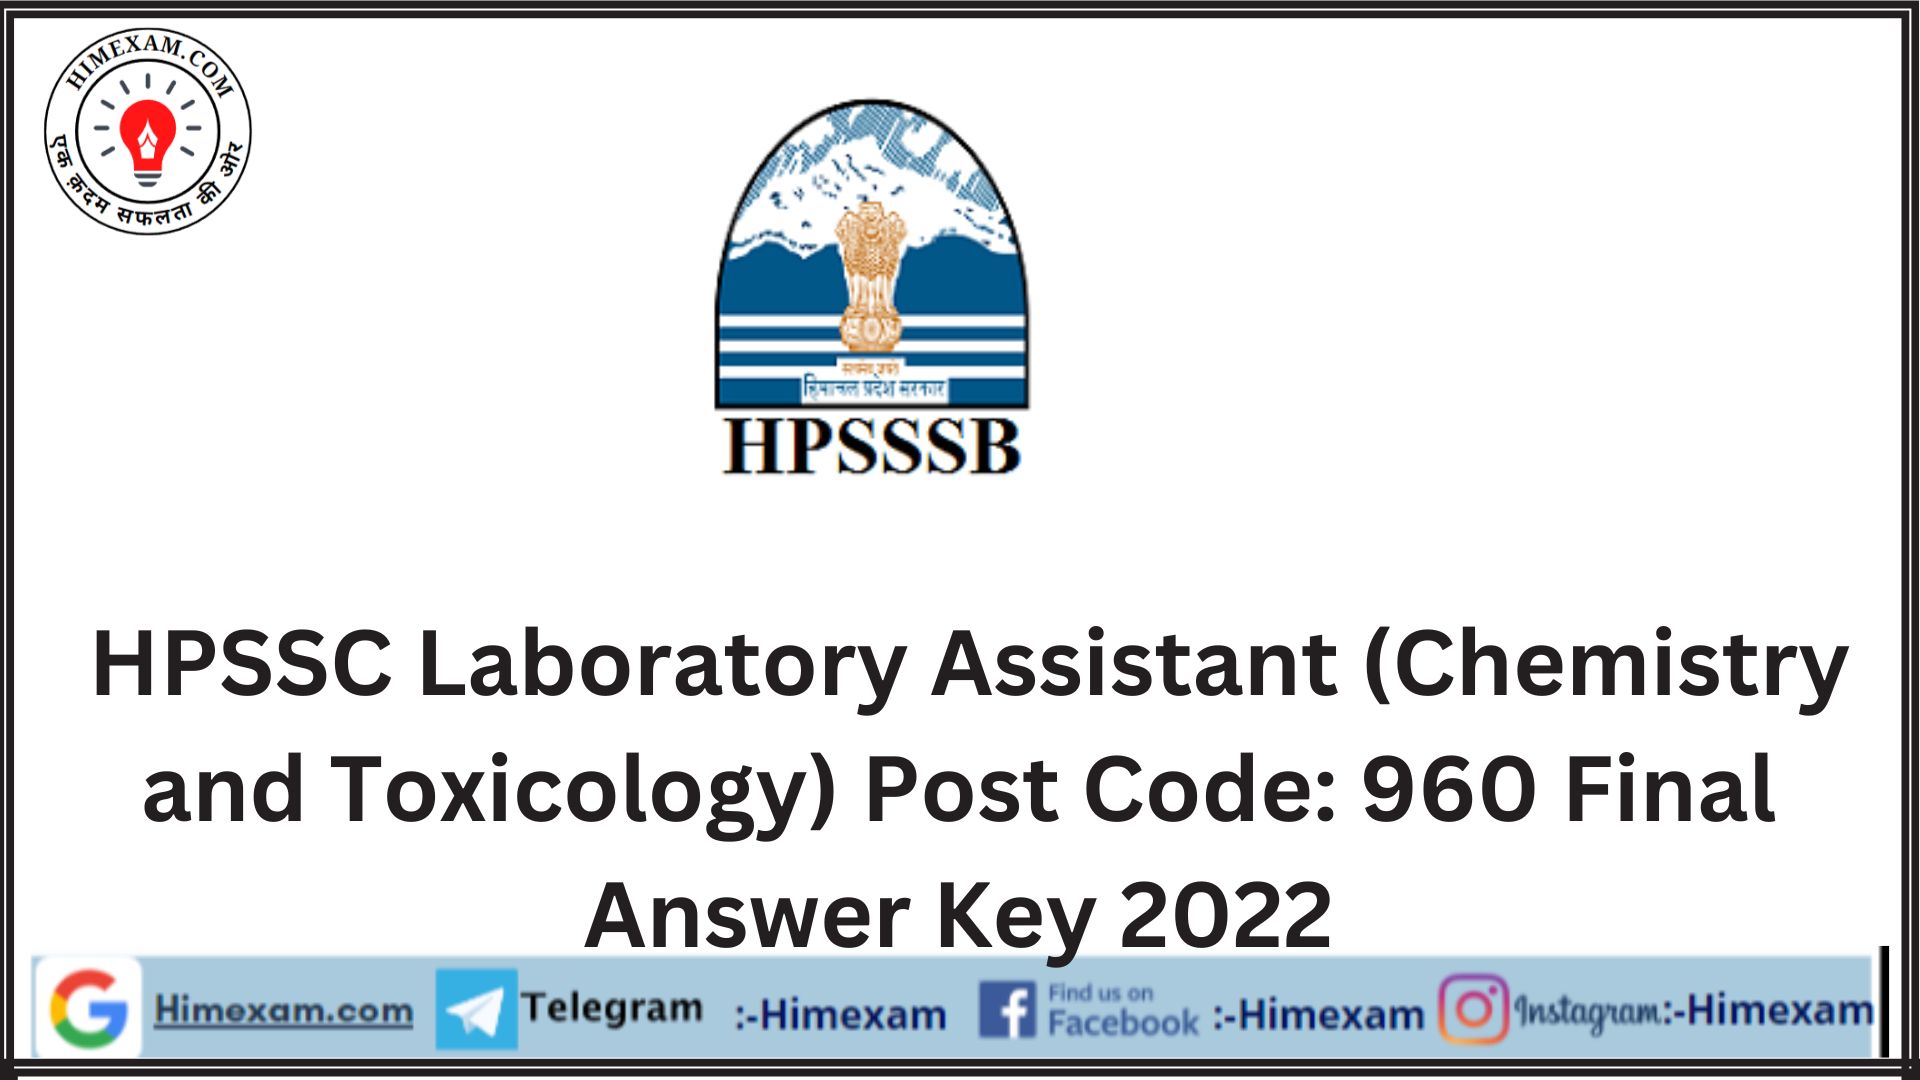 HPSSC Laboratory Assistant (Chemistry and Toxicology) Post Code: 960 Final Answer Key 2022